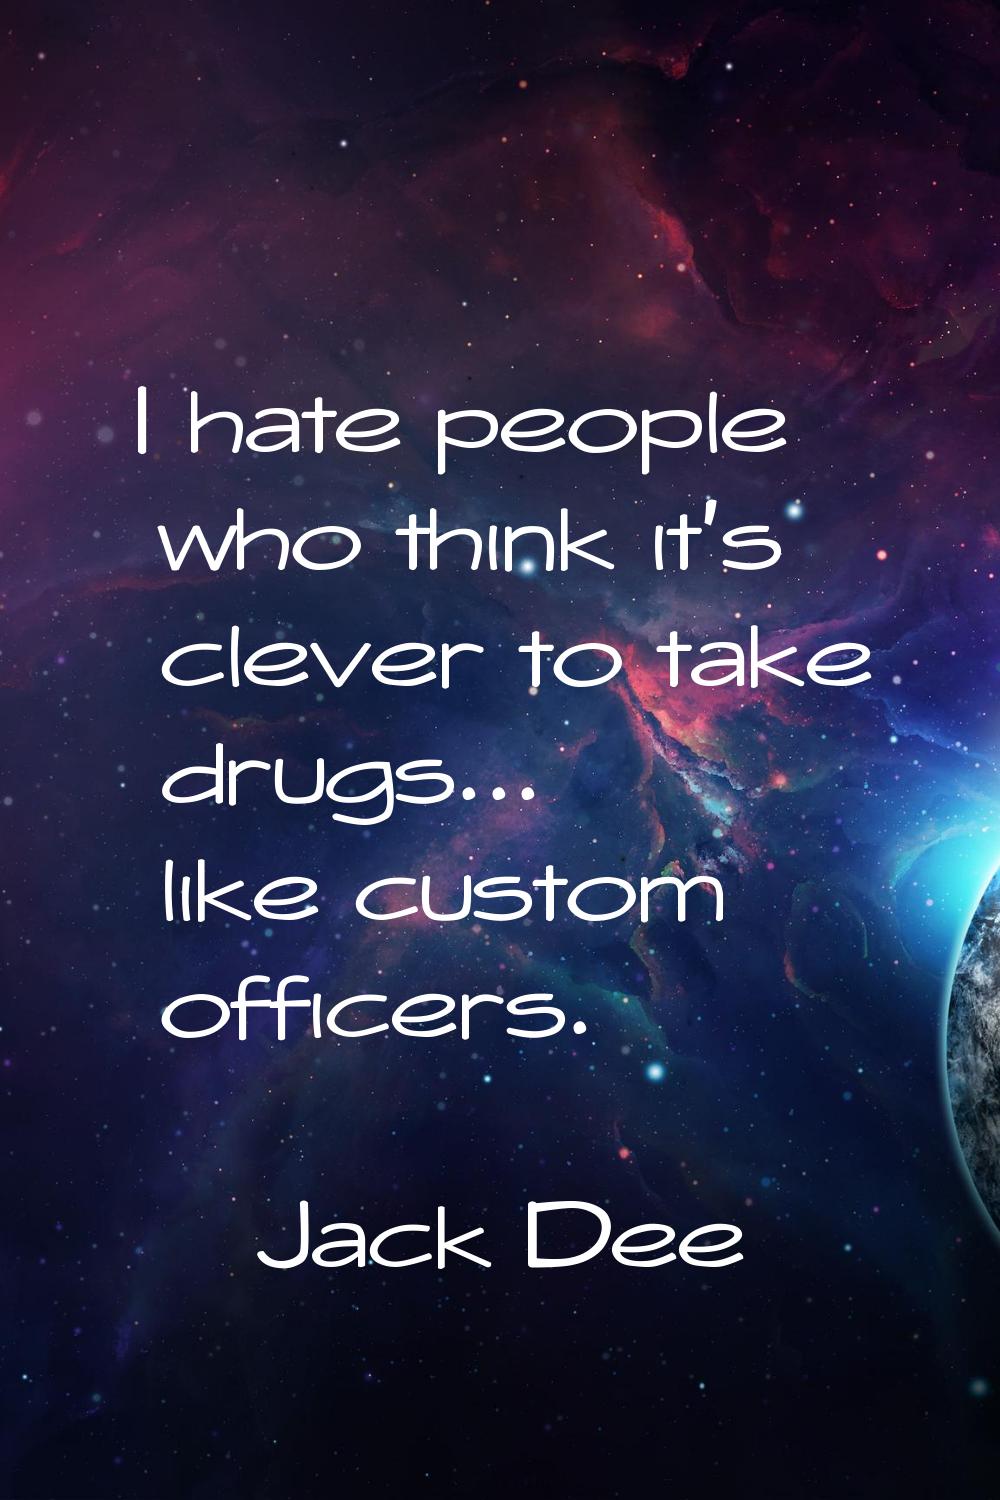 I hate people who think it's clever to take drugs... like custom officers.